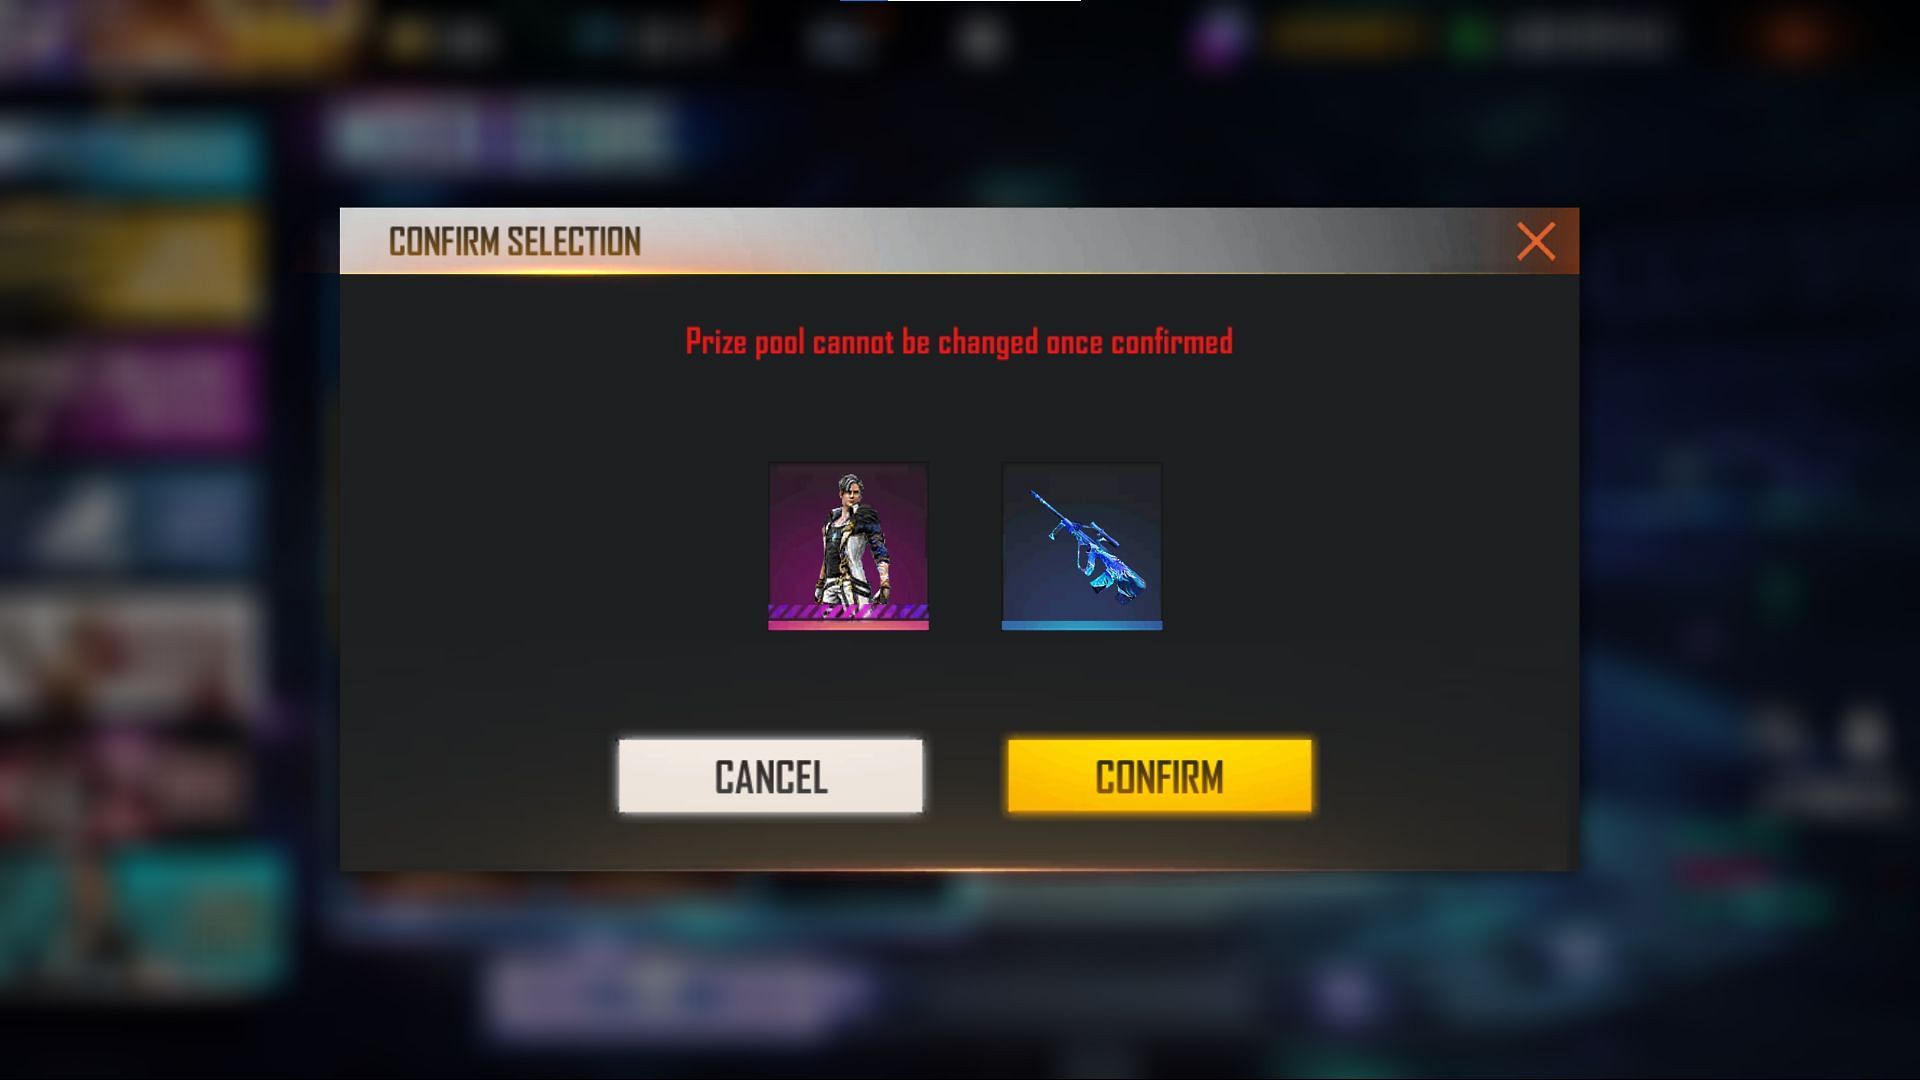 Users cannot change the prize pool after selecting the items (Image via Garena)